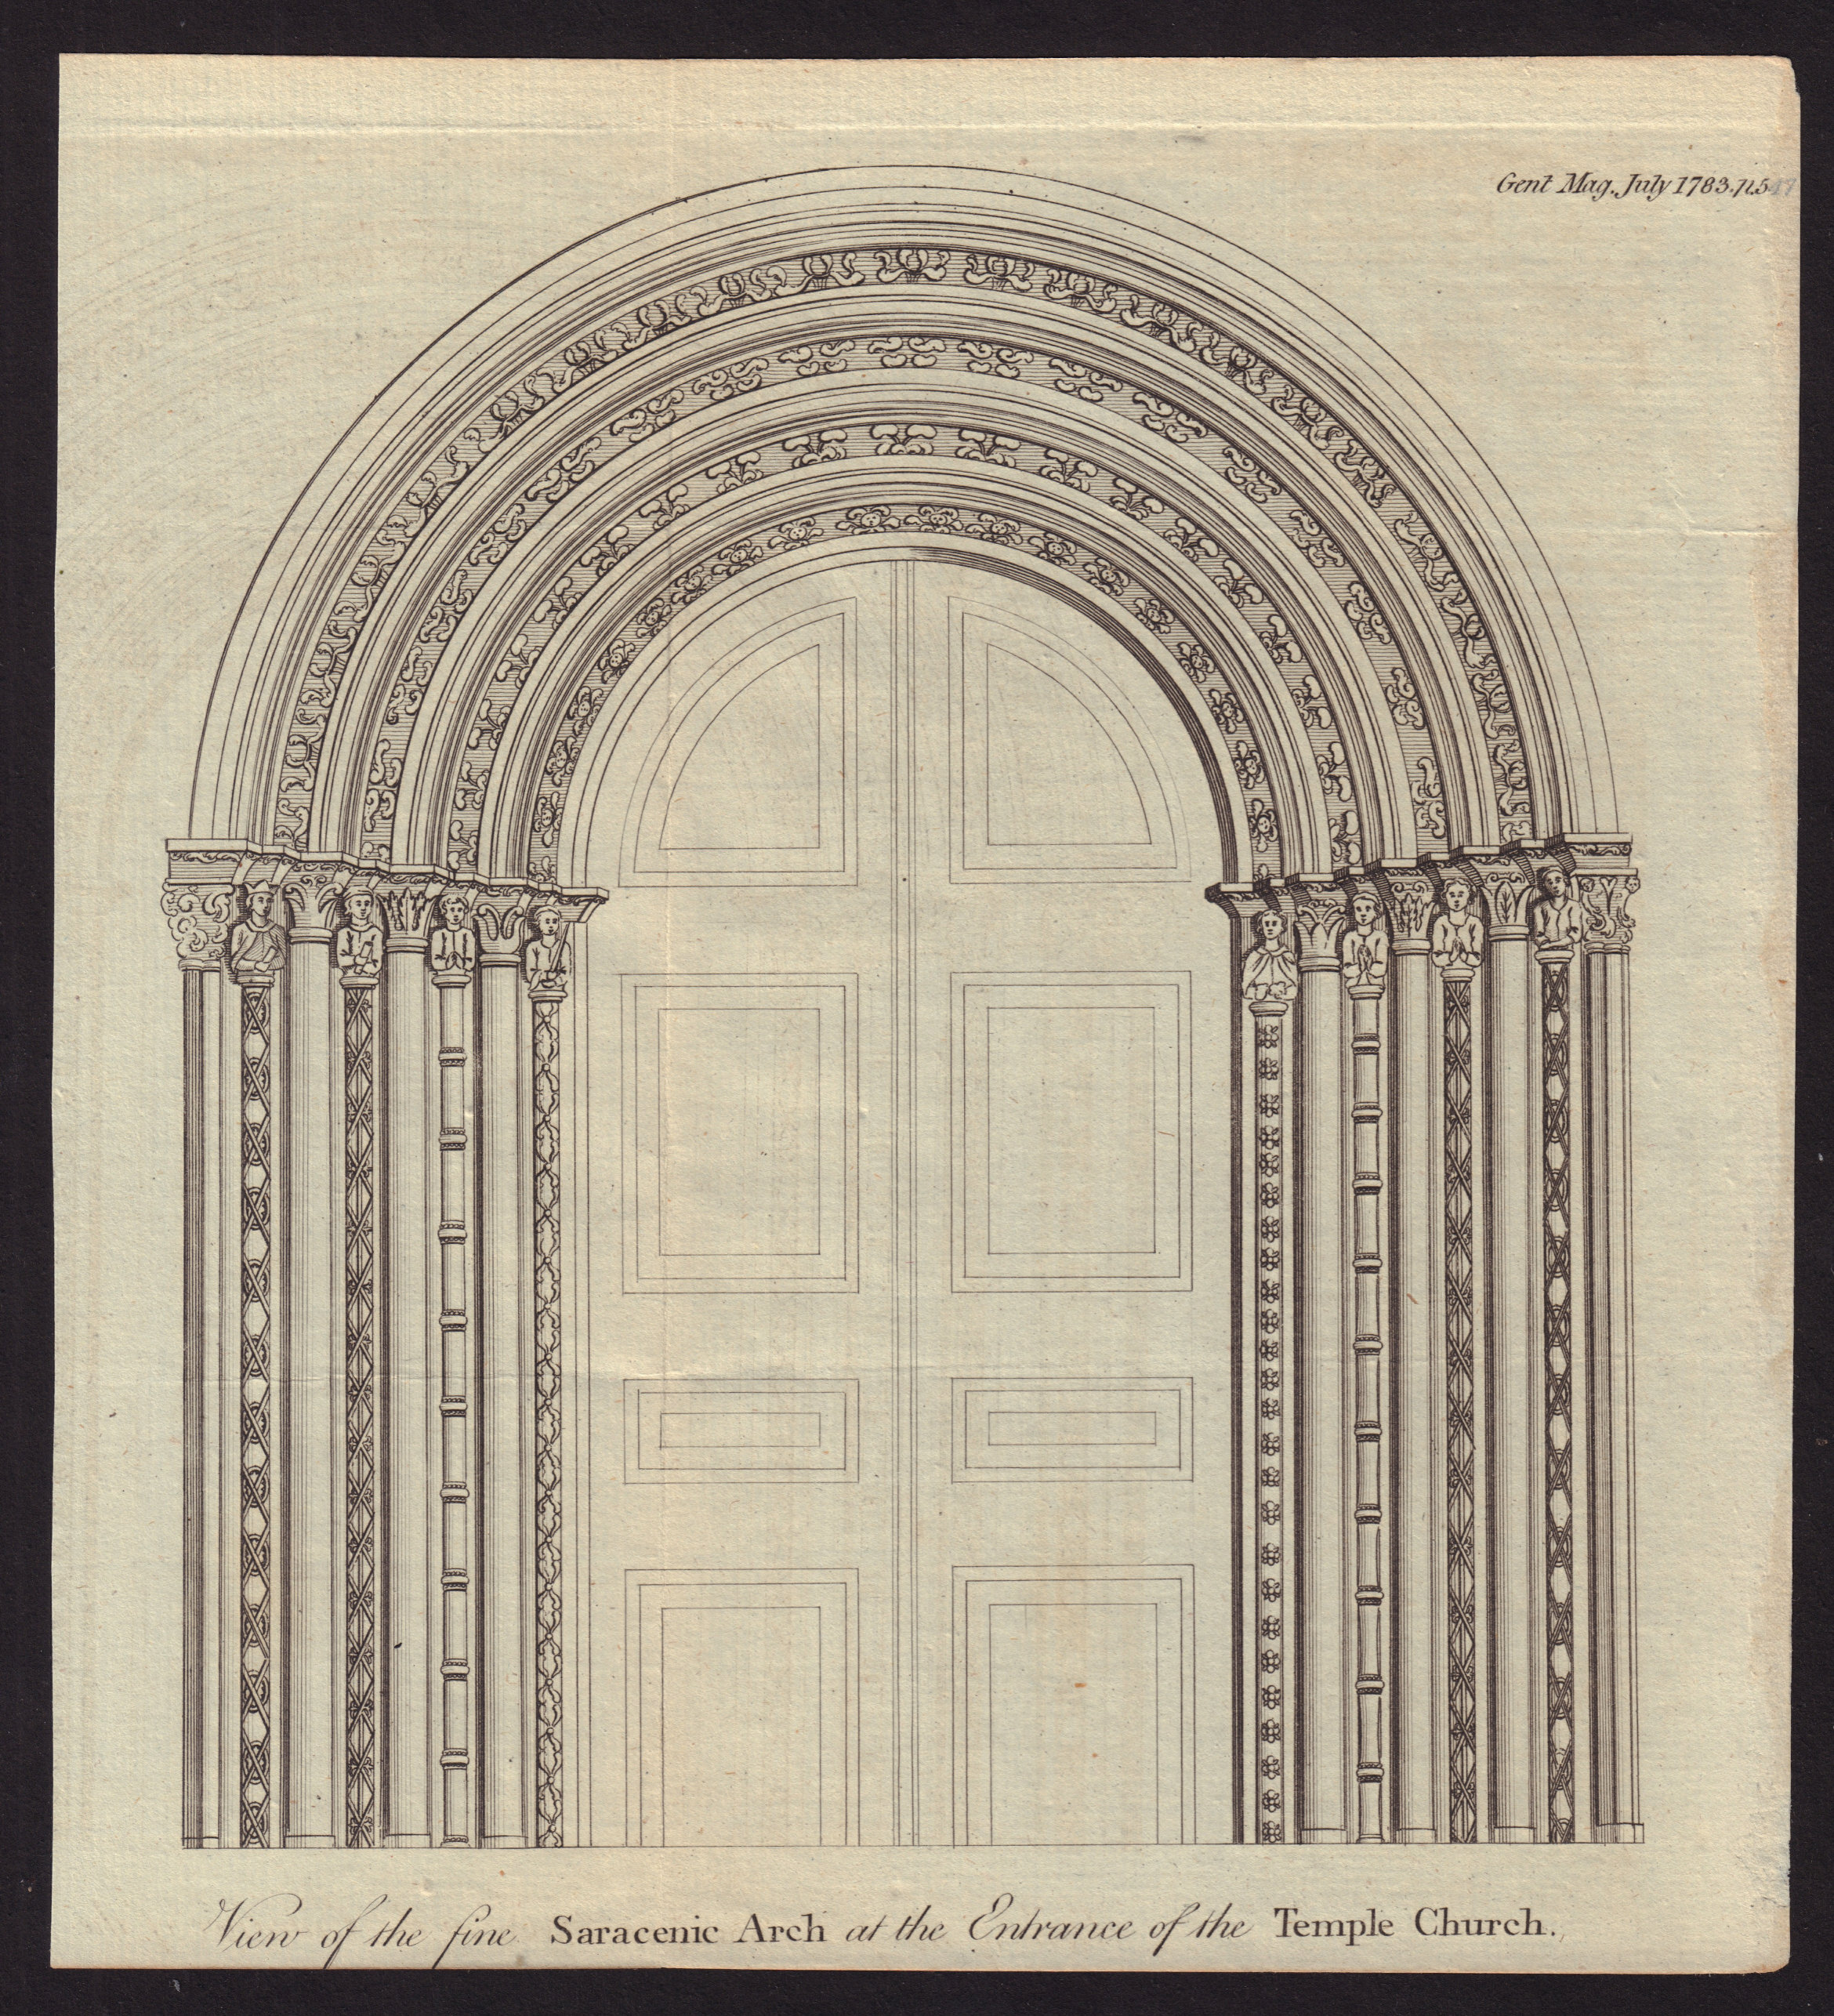 The Saracenic Arch at the Entrance of the Temple Church, London 1783 old print